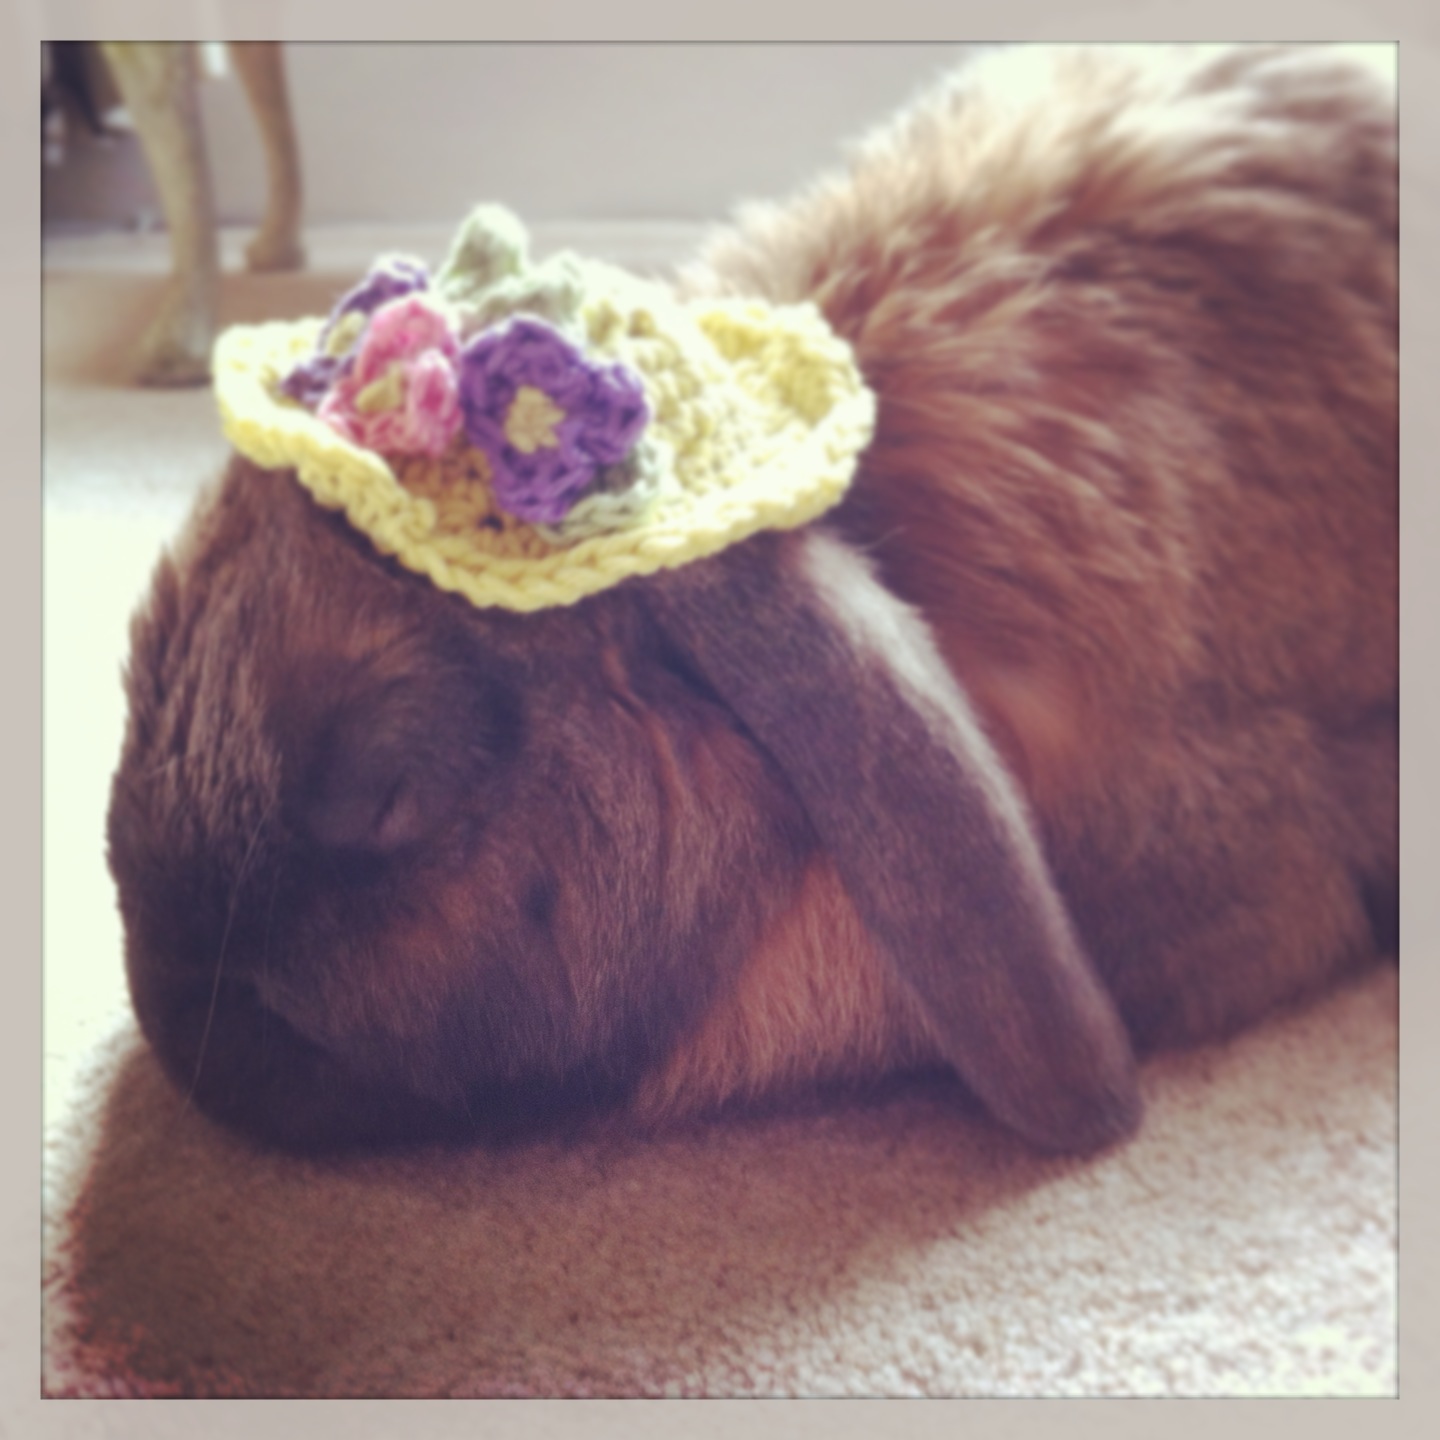 Bunny Falls Asleep in His Easter Hat After a Long Day